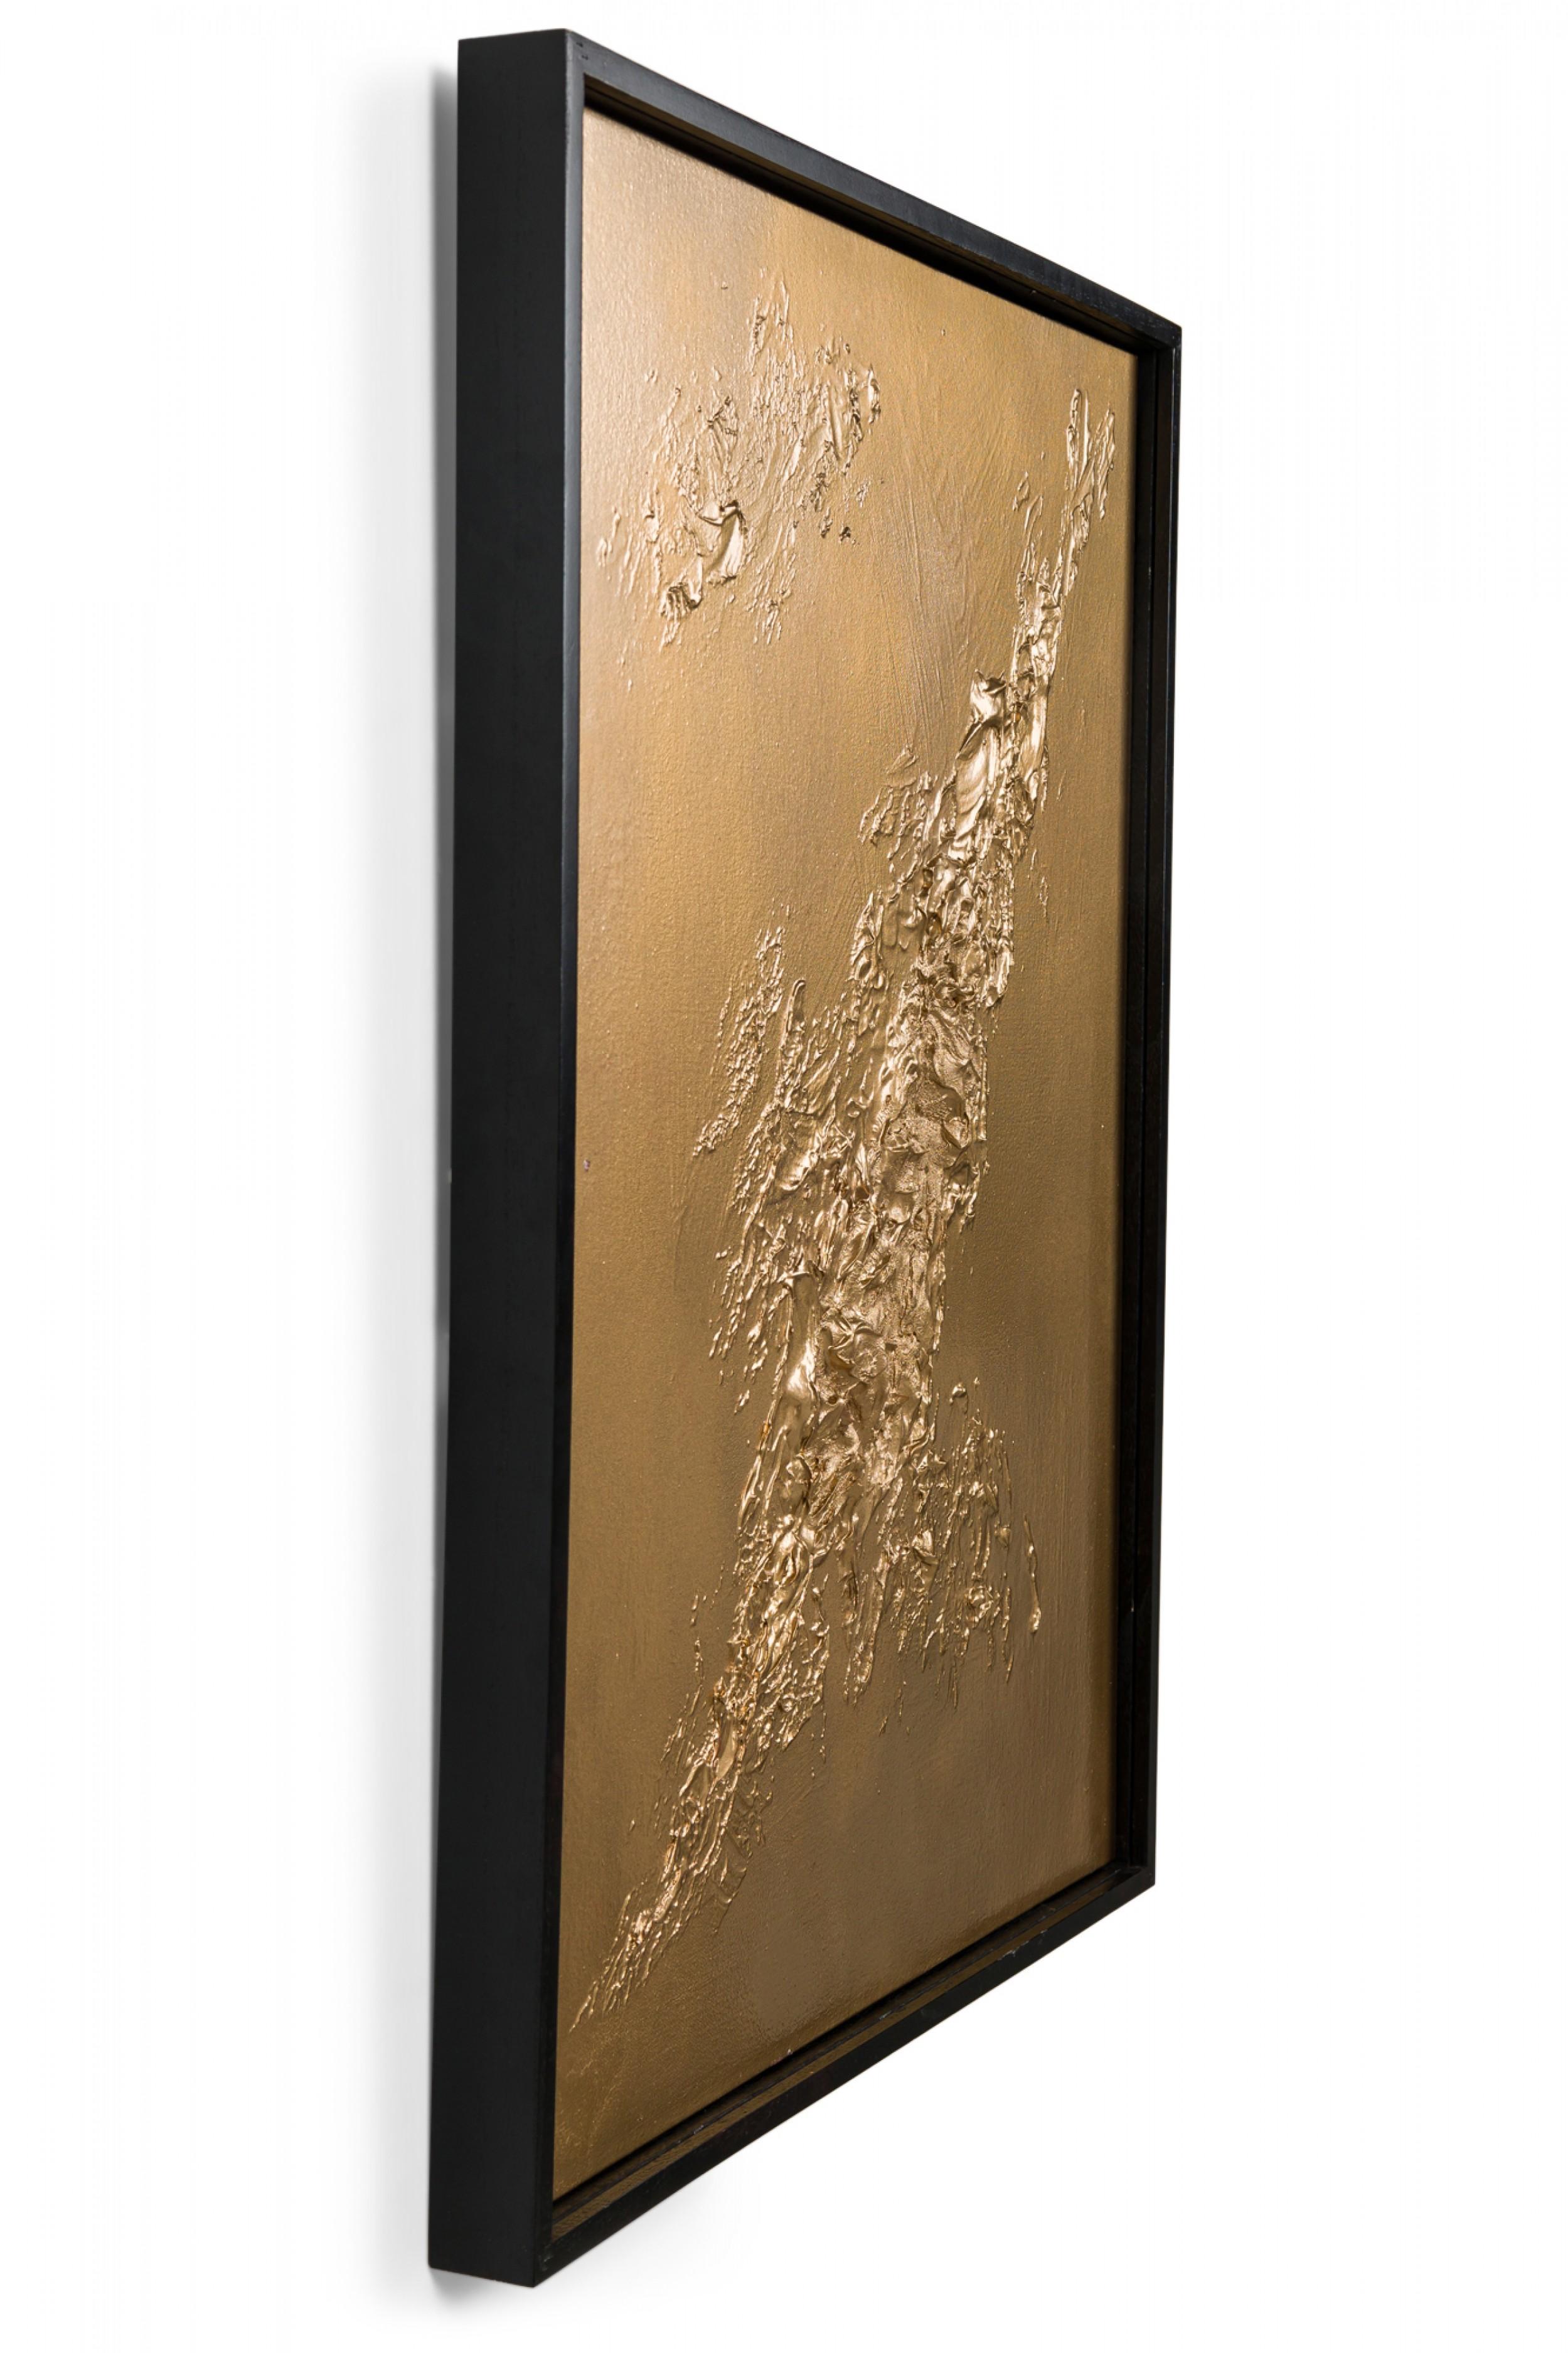 Contemporary mixed media abstract painting with textured 3D shapes painted gold on gold ground rectangular canvas in black wooden frame. (BARBARA KISKOVSKI).